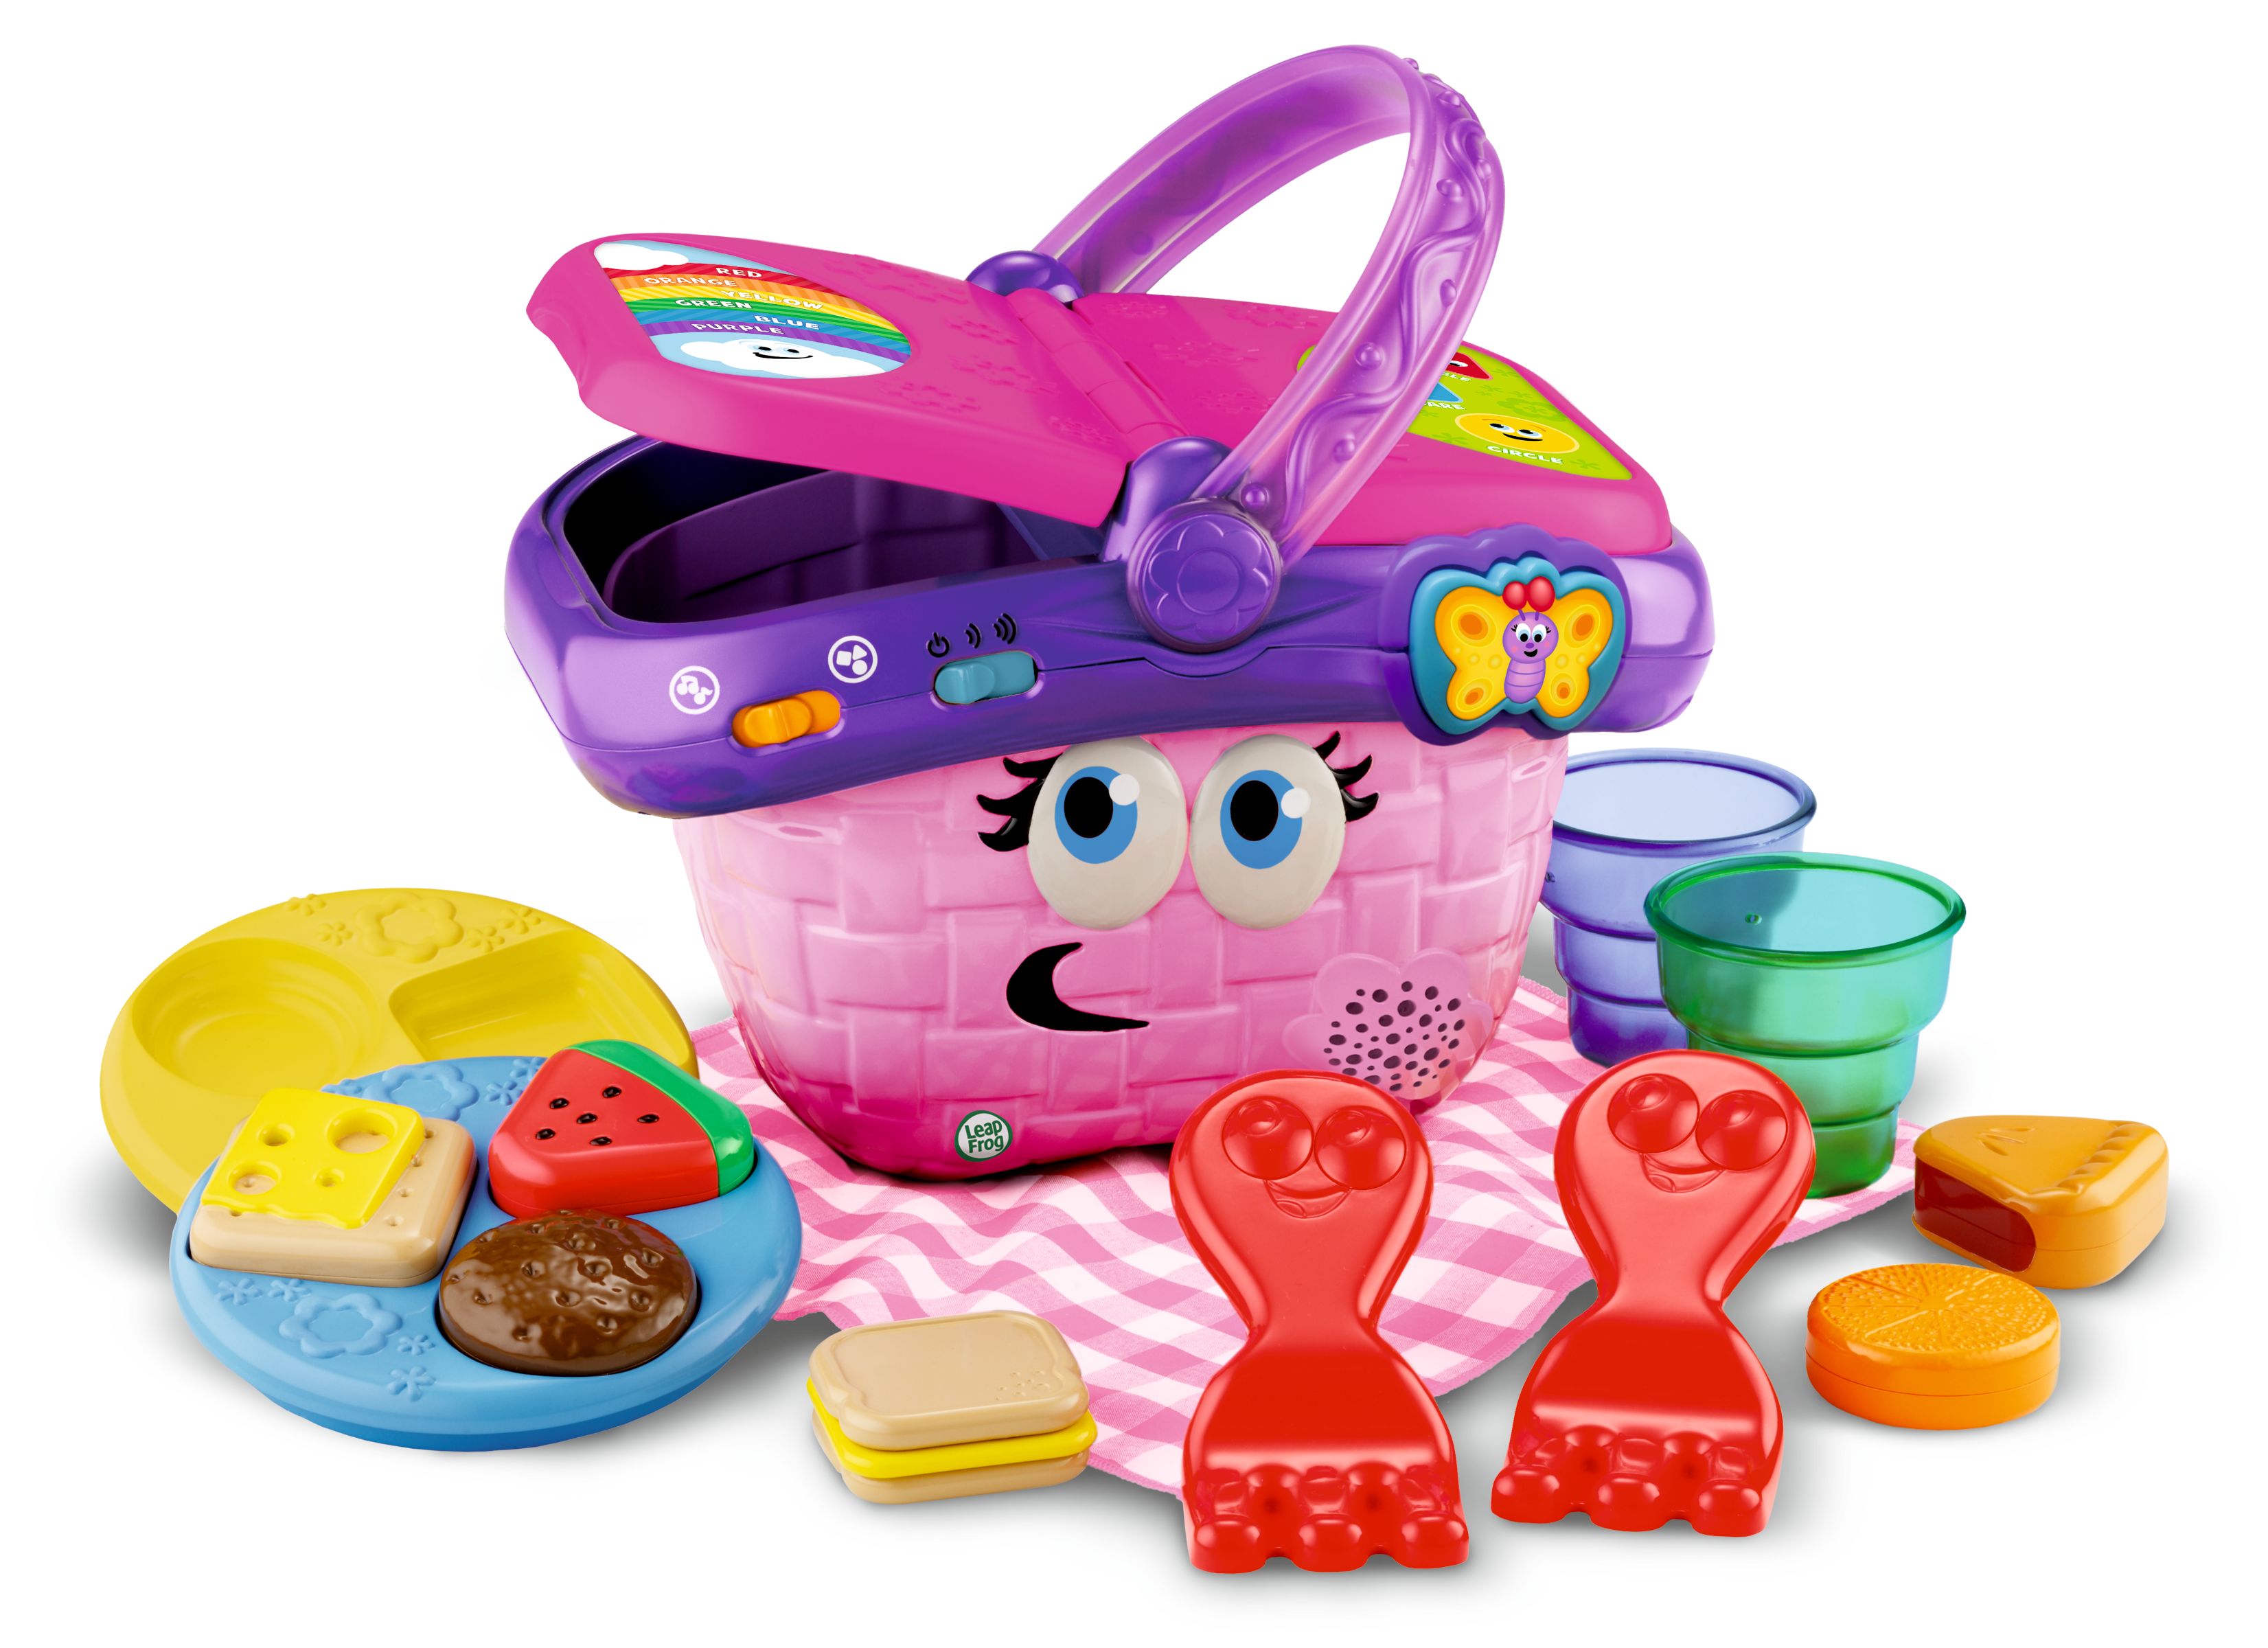 LeapFrog Shapes and Sharing Picnic Basket, Role-Play Toy for Kids - image 1 of 6